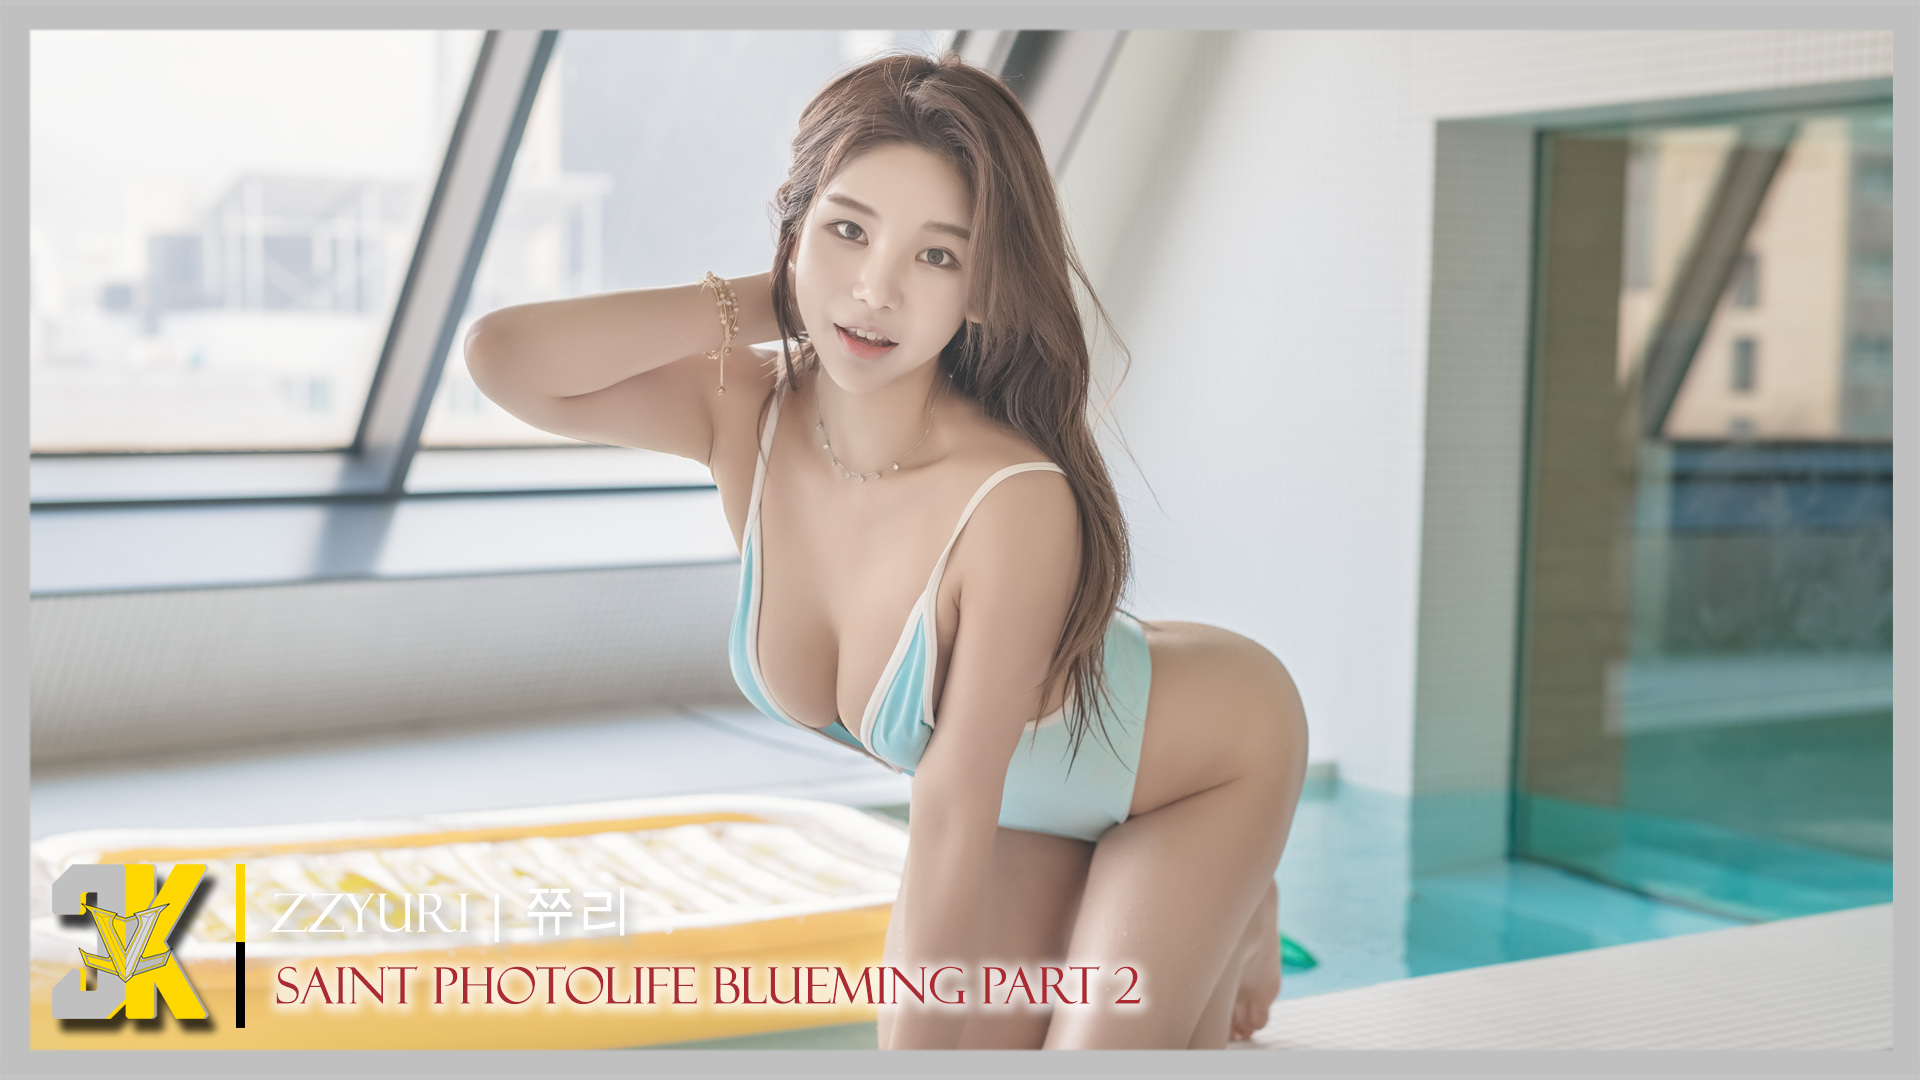 This is the sample picture from Zzyuri｜쮸리 - SAINT Photolife - Blueming 2 post. Click here to see image full size.